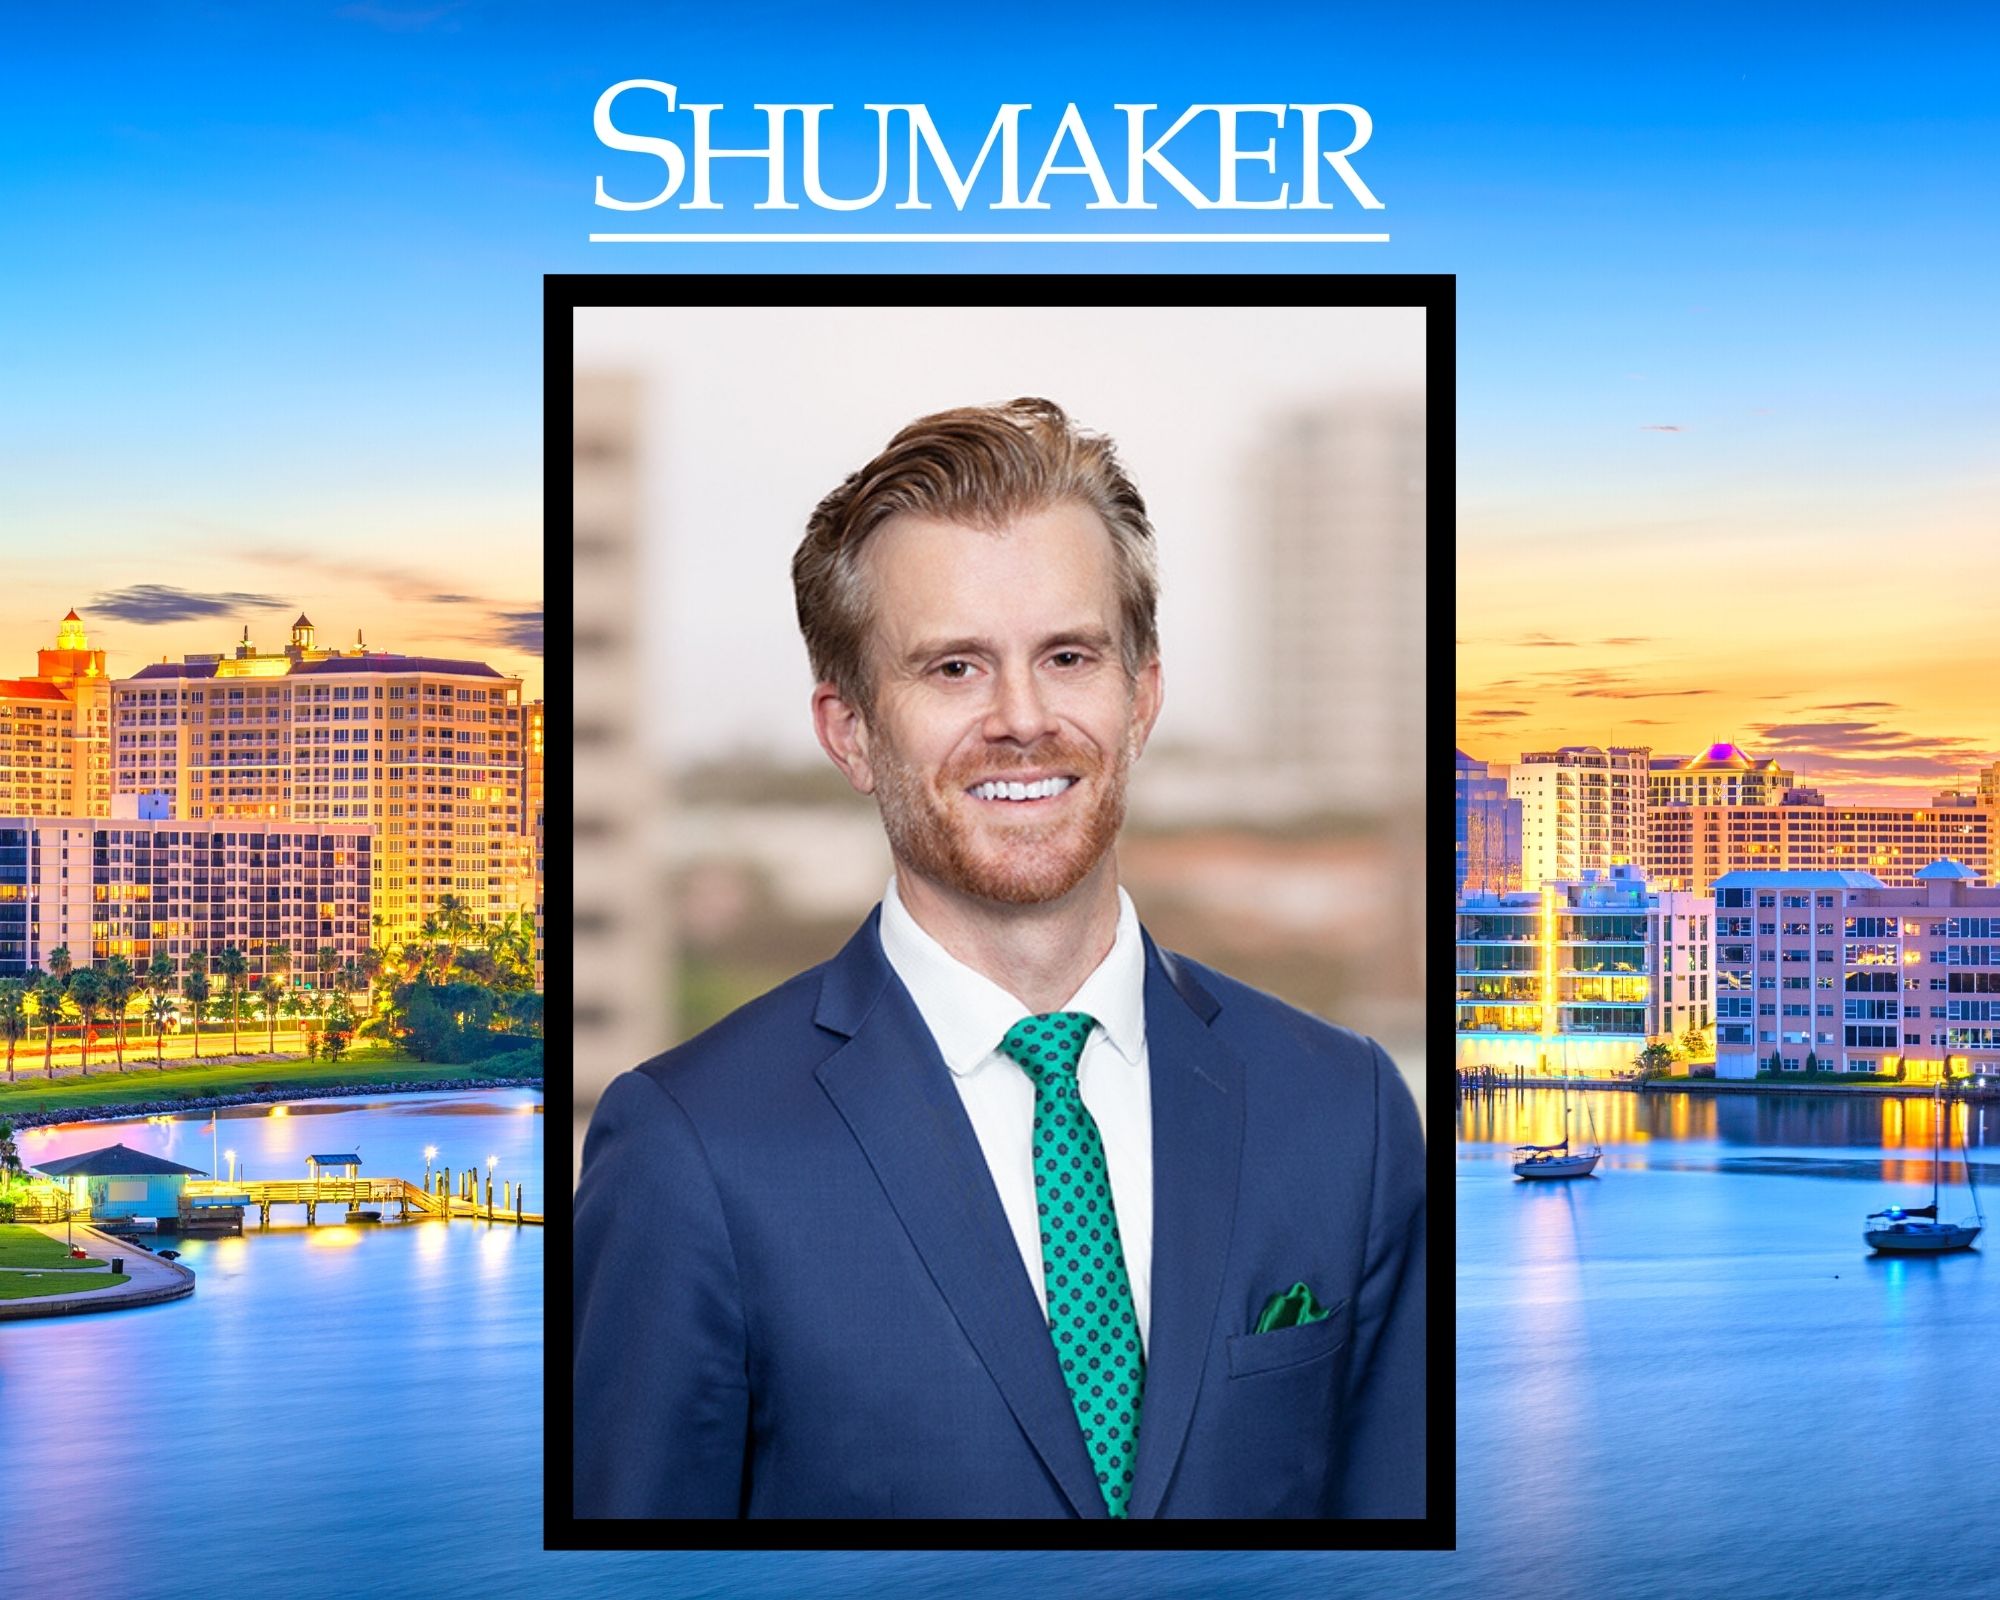 Shumaker Lawyer Named Lead Broadcast Commentator for World’s Largest Rowing Regatta 